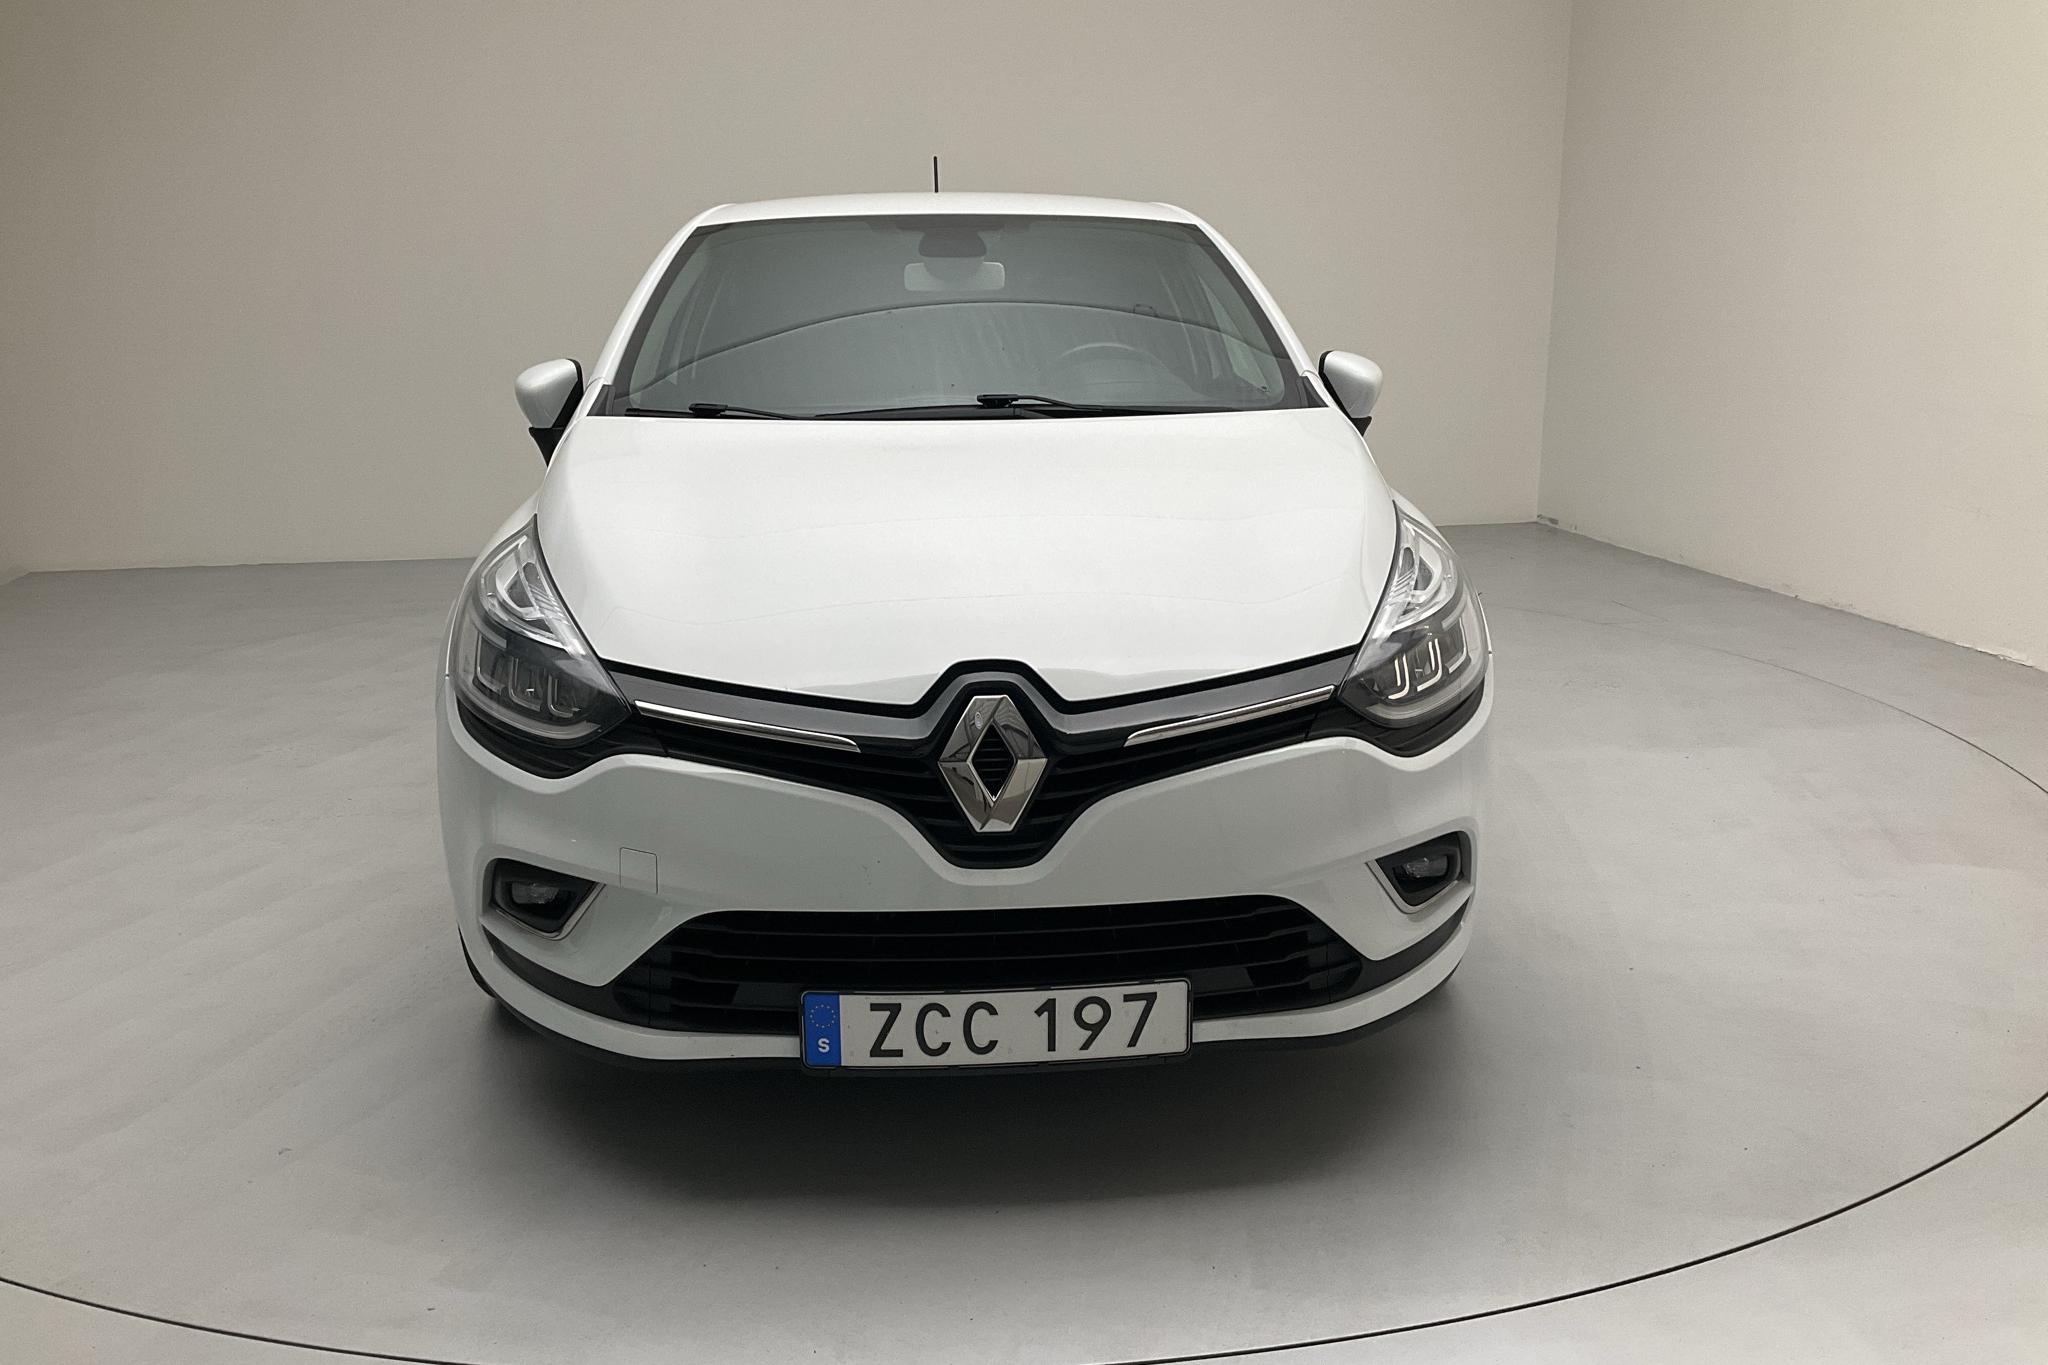 Renault Clio IV 1.2 TCe 120 5dr (120hk) - 43 790 km - Automatic - white - 2018